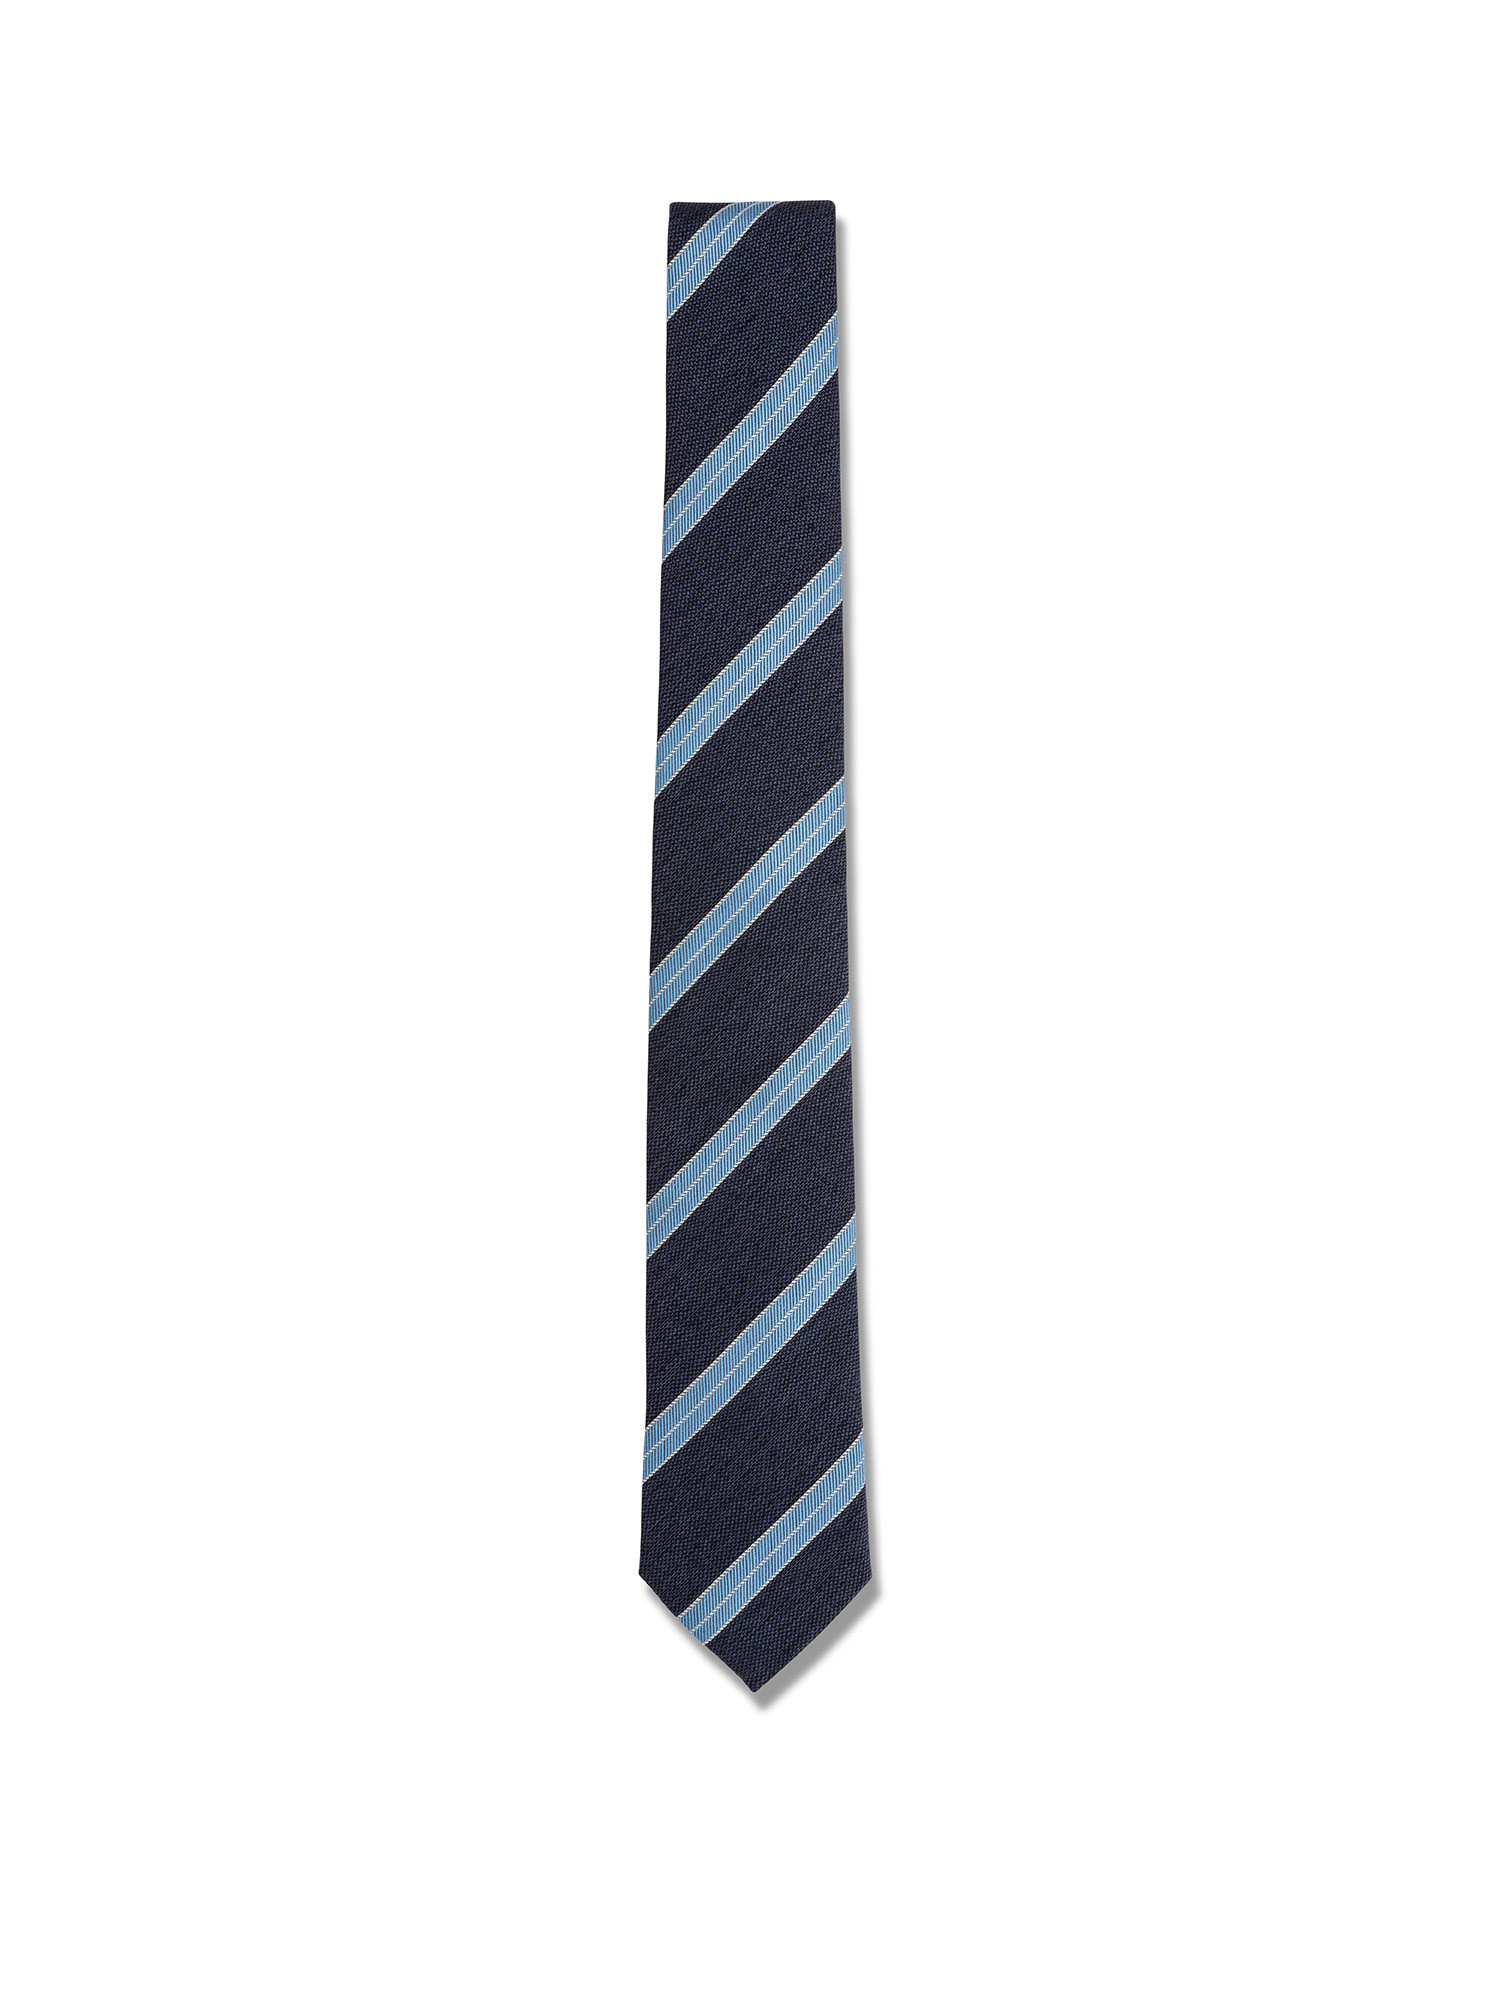 Luca D'Altieri - Patterned cotton and silk tie, Blue, large image number 1